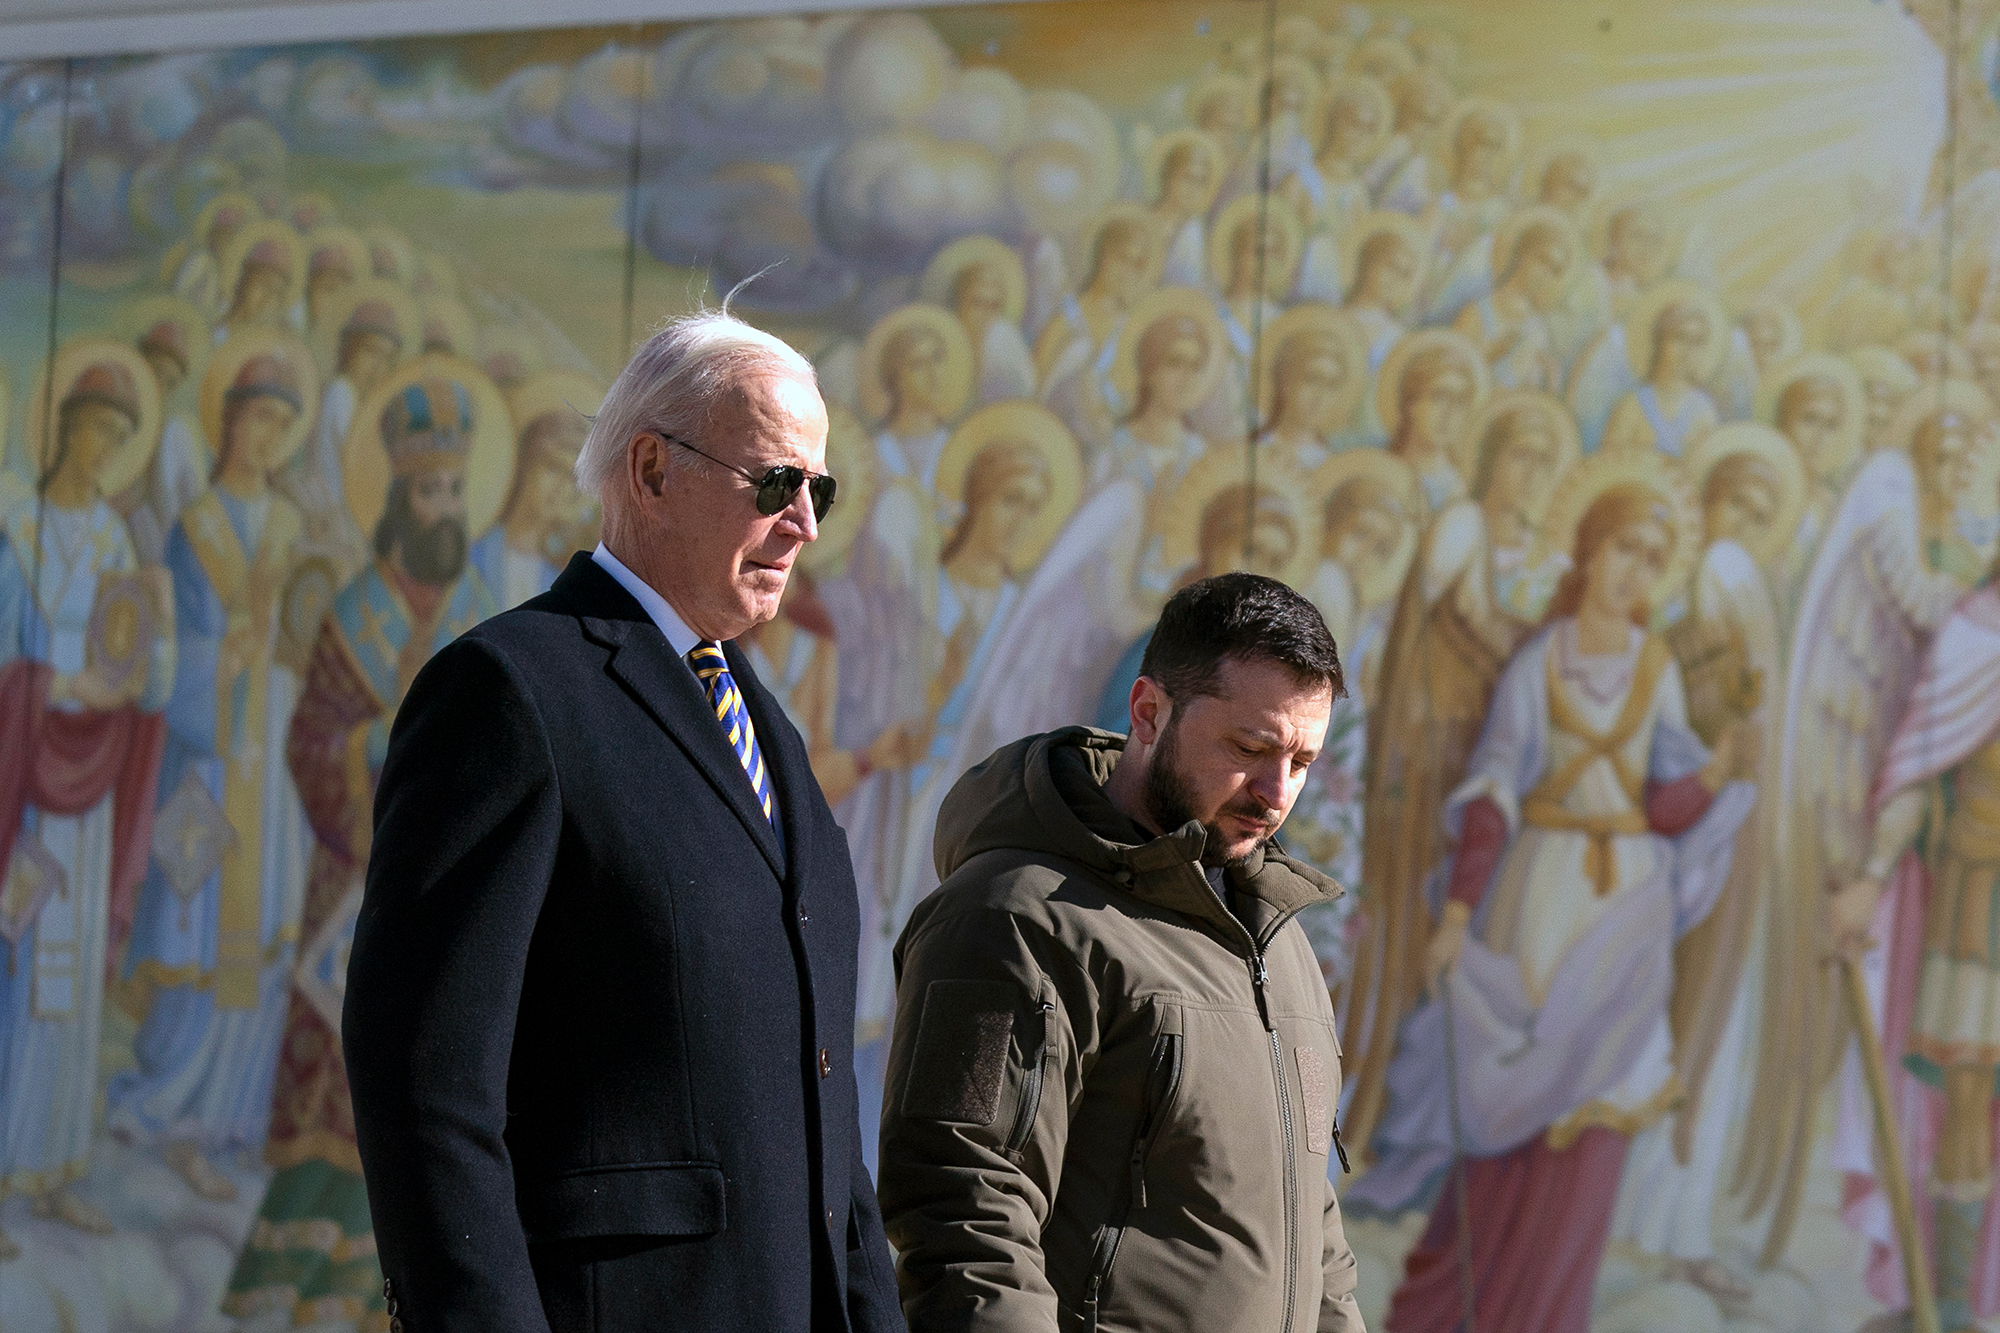 US President Joe Biden walks with Ukrainian President Volodymyr Zelensky at St. Michaels Golden-Domed Cathedral during an unannounced visit in Kyiv, Ukraine, on Monday, February 20.